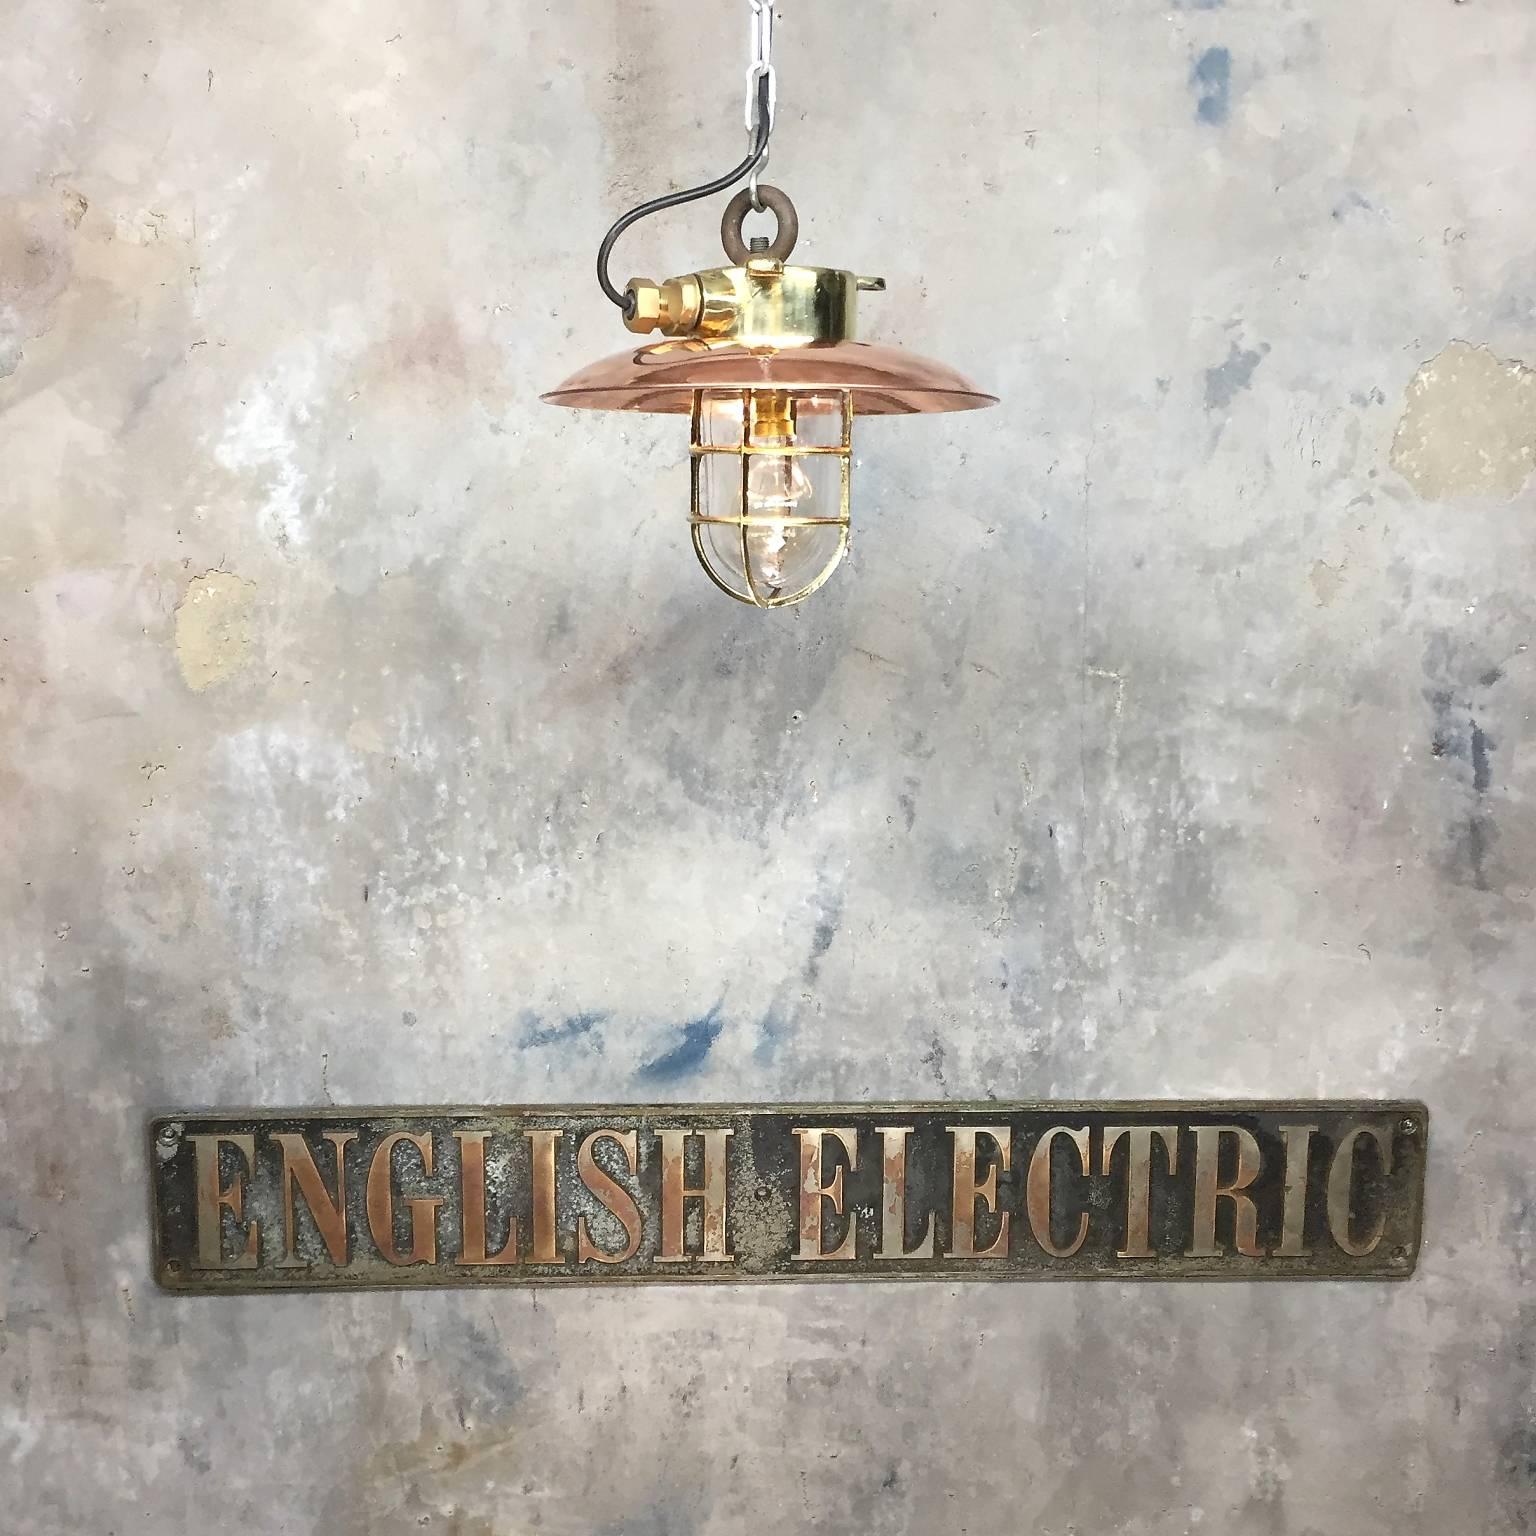 Solid brass explosion proof pendant with copper shade. This excellent example of an original explosion proof lamp which was salvaged from an old Japanese cargo ship circa 1977. The body and cage are both cast, with glass dome and spun shade. A very